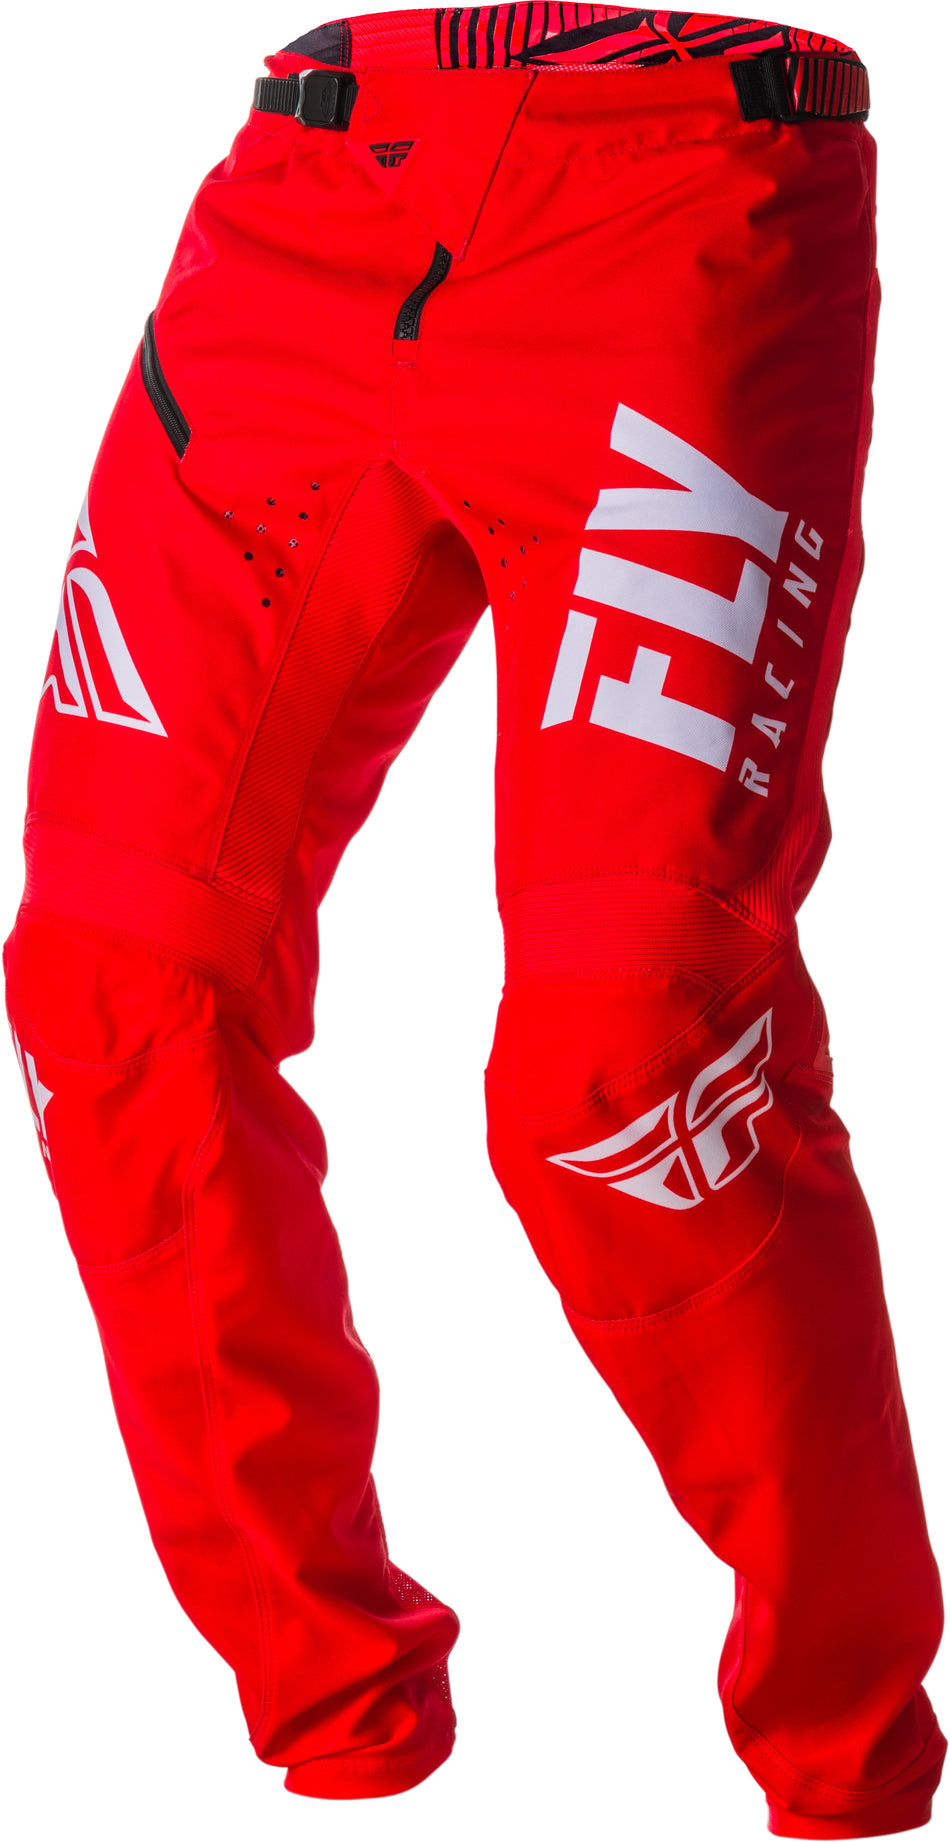 FLY RACING Kinetic Shield Bicycle Pants Red/White Sz 30 372-02230